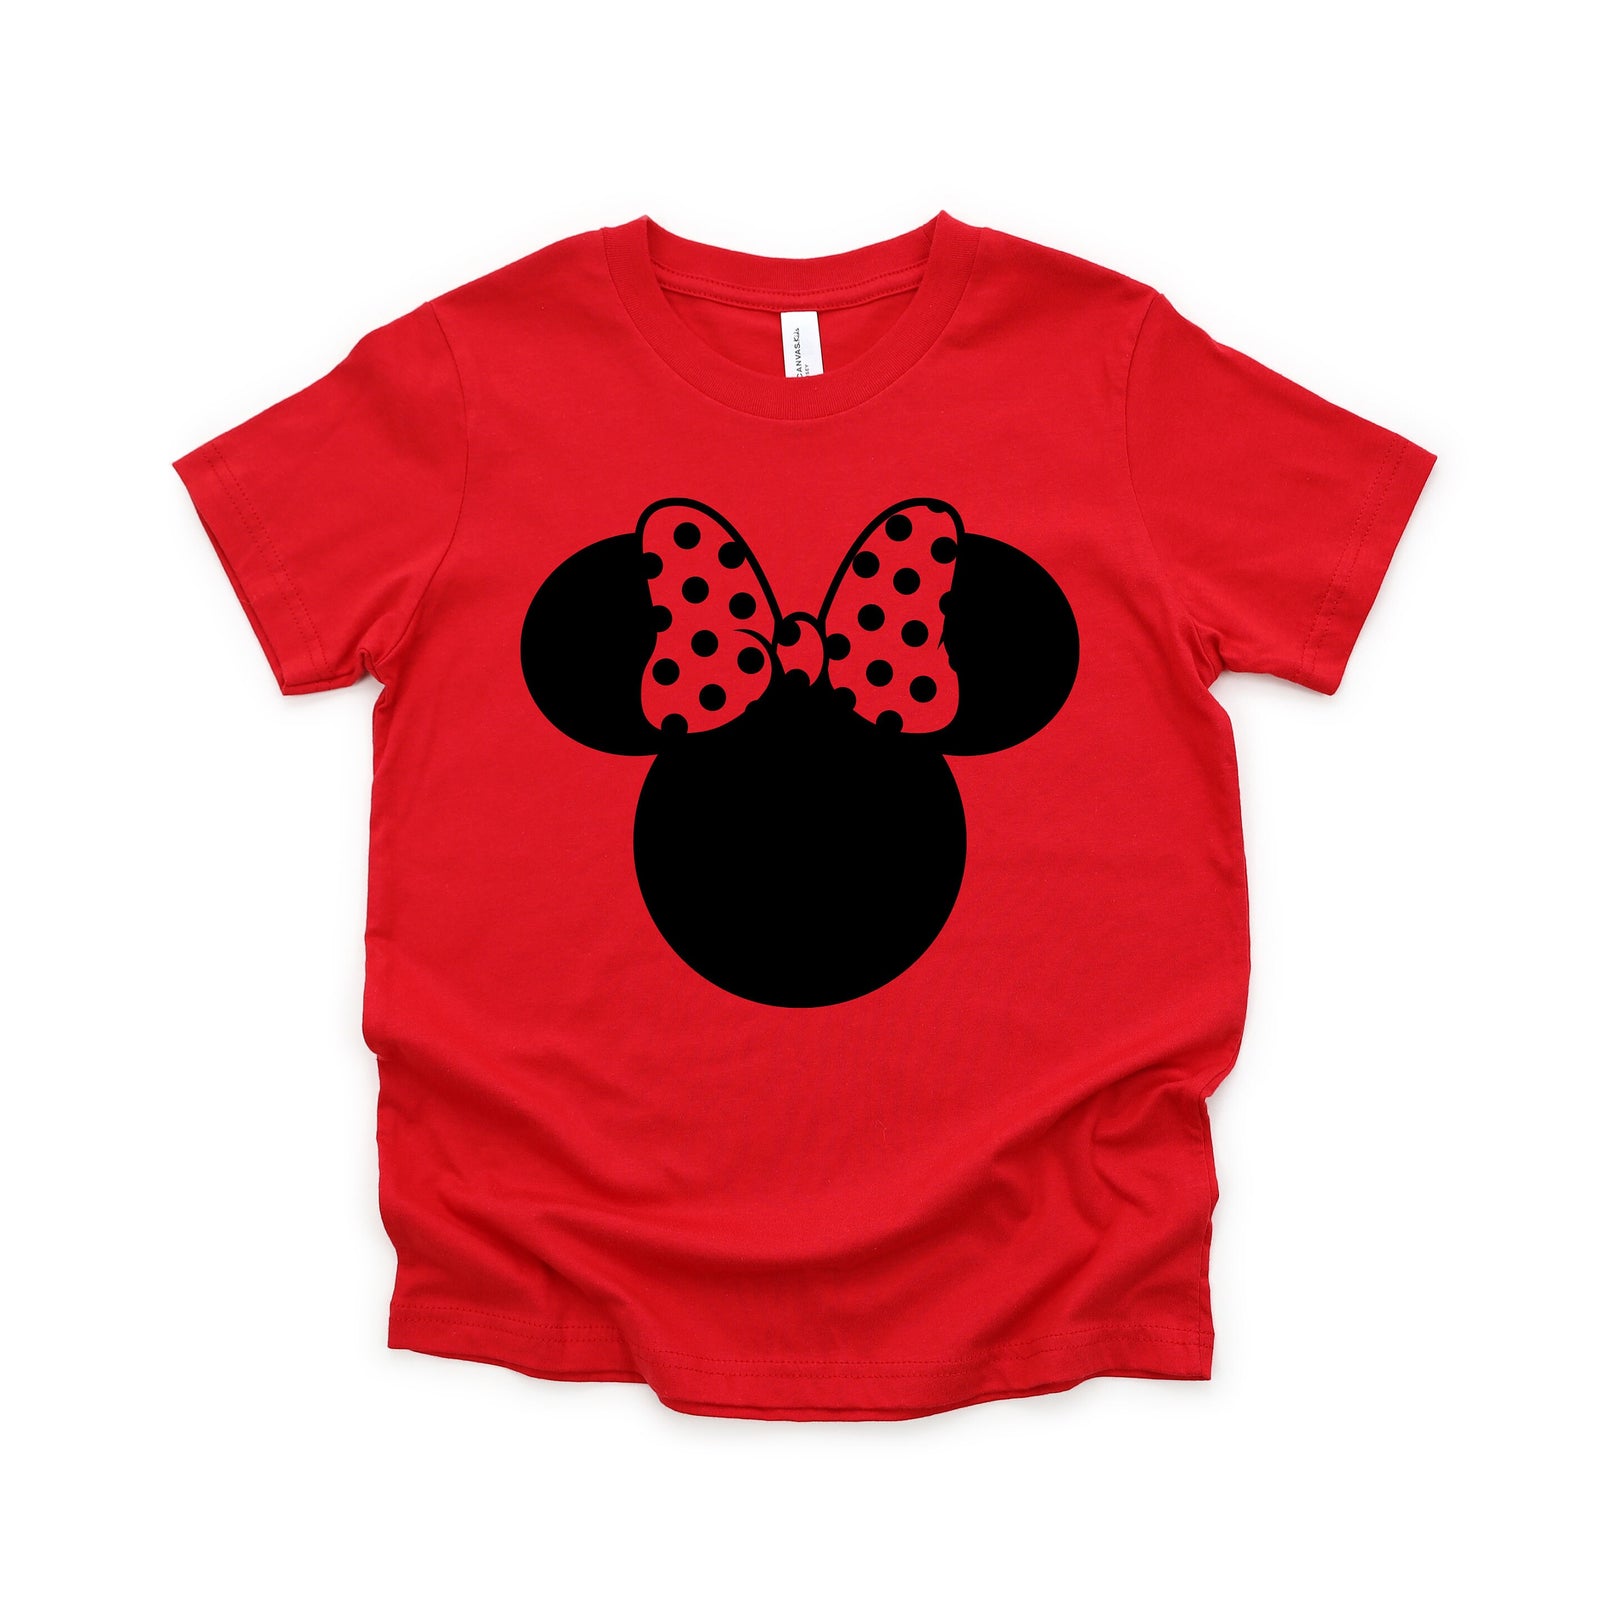 Minnie Mouse with Polka Dot Bow Disney Kids Shirt - Infant Toddler & Youth Shirt - Minnie Ears